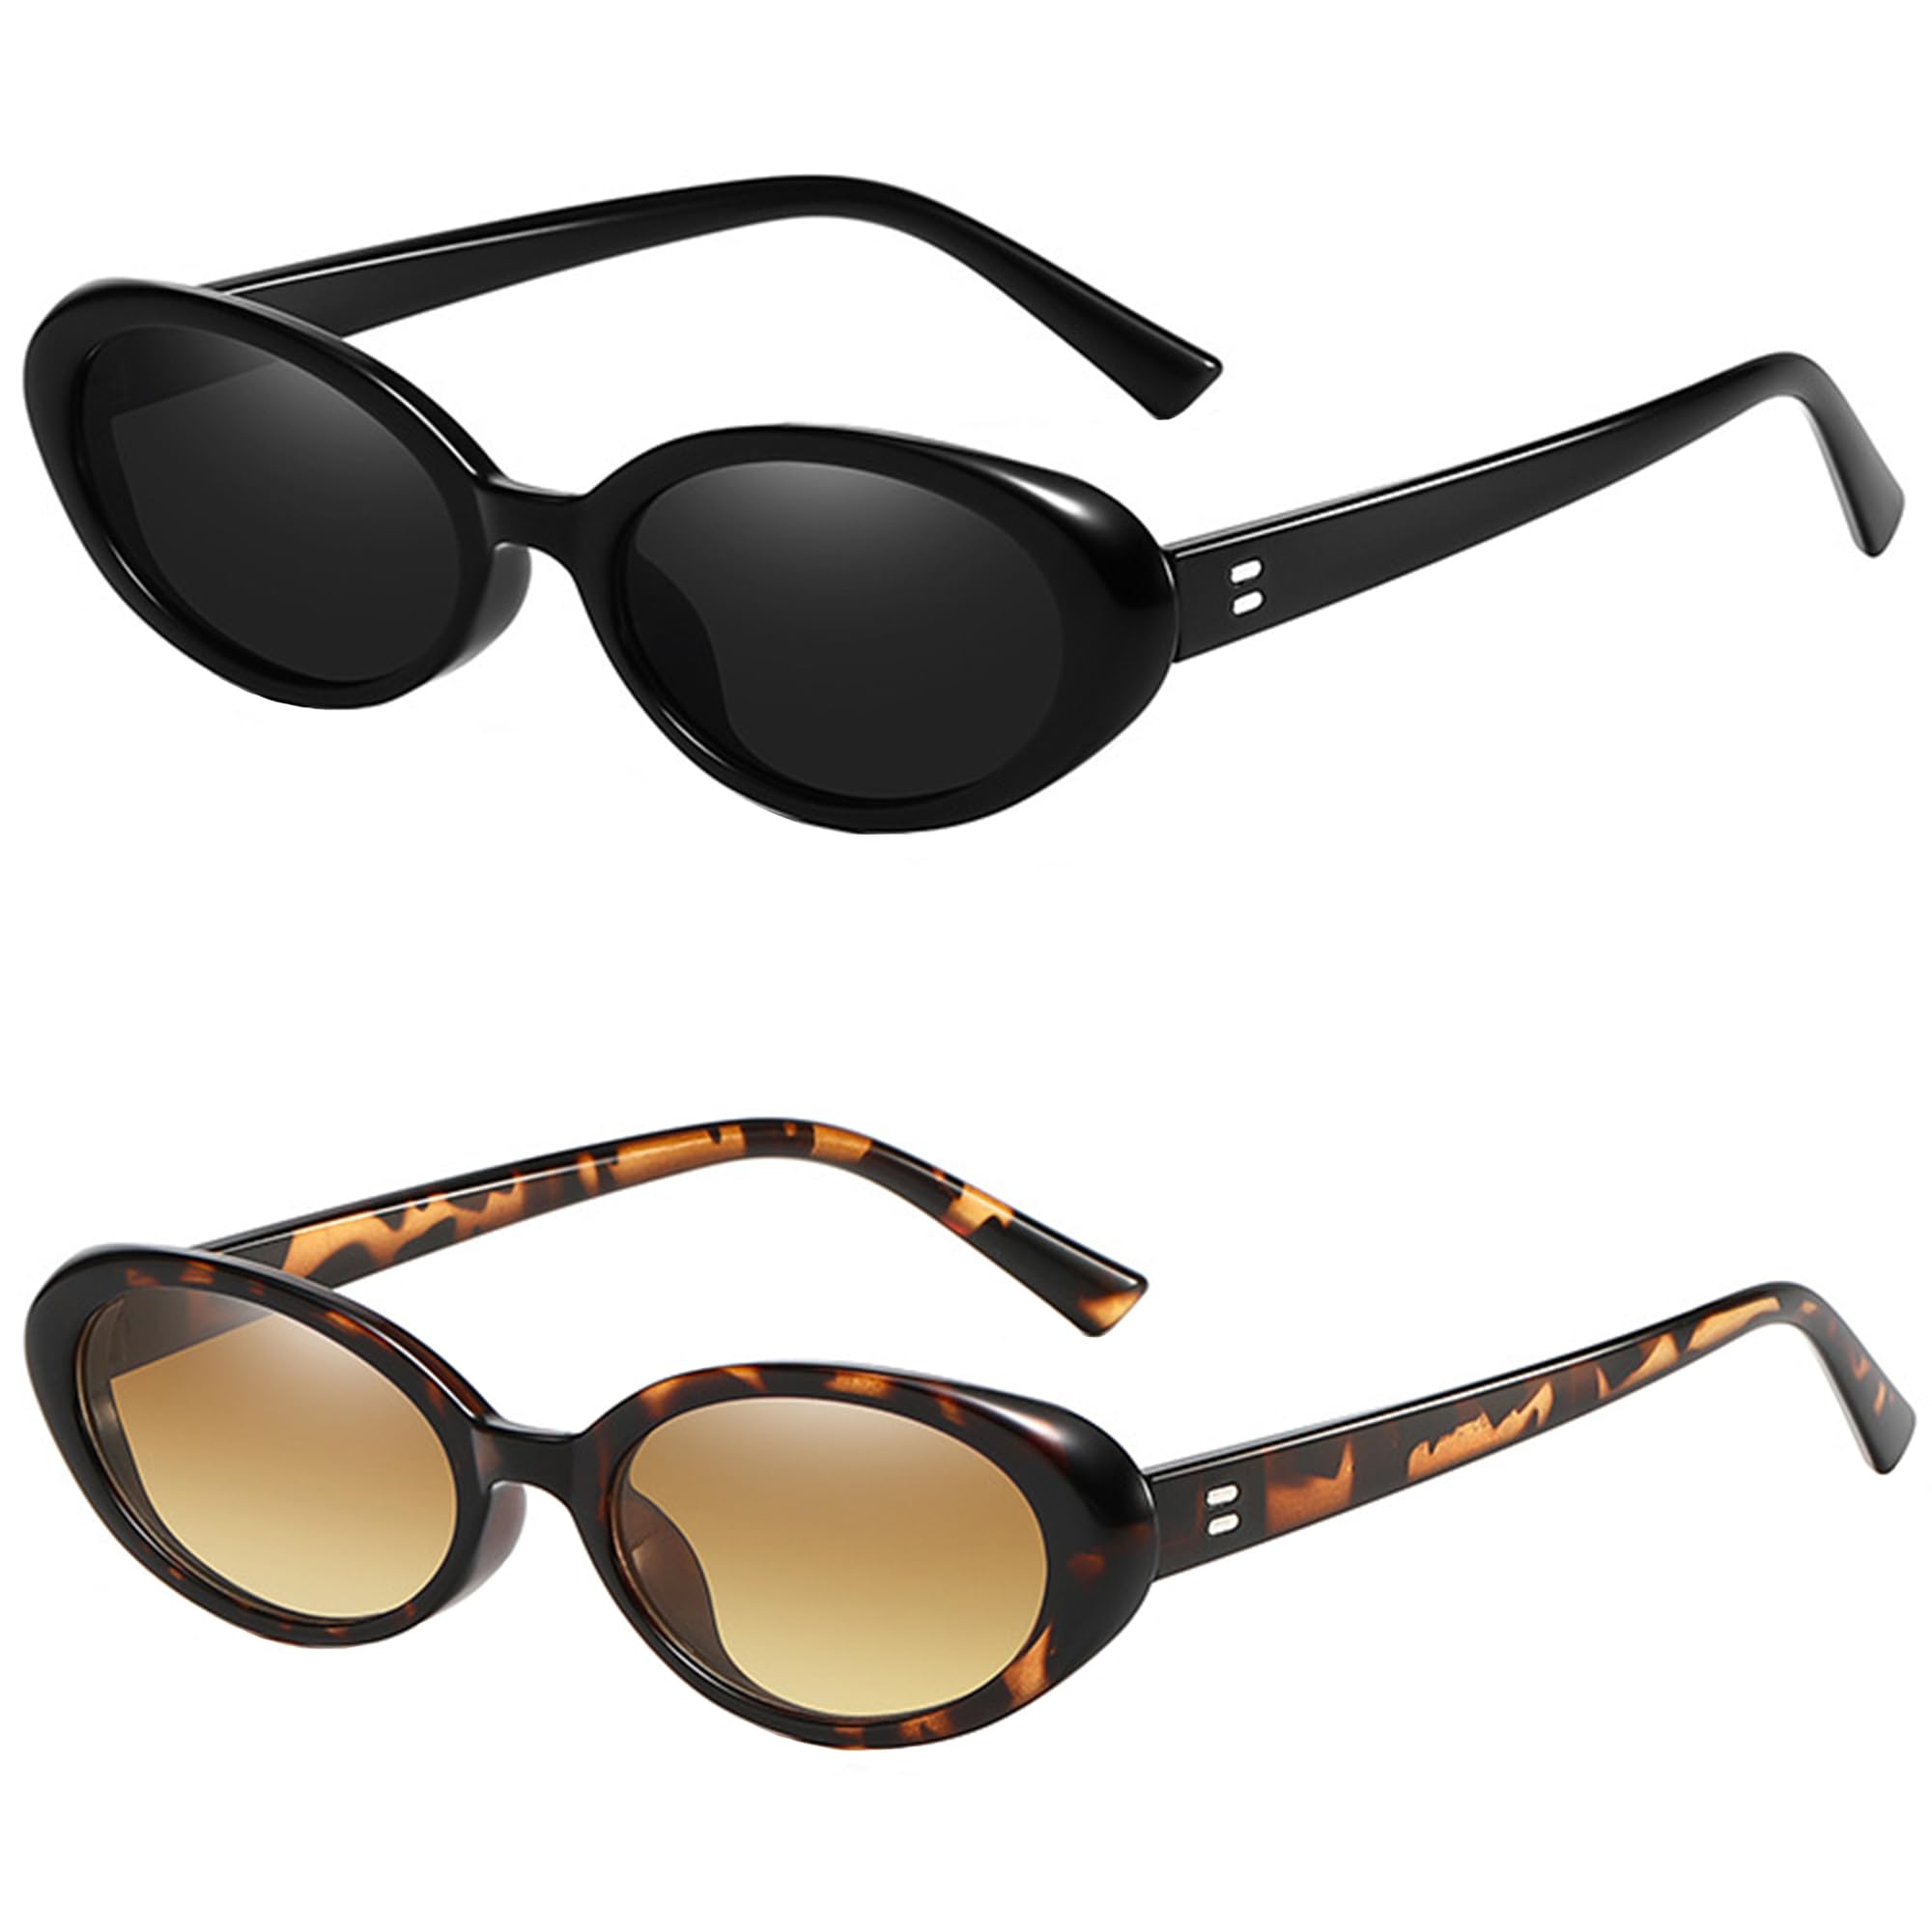 Best Oval Sunglasses Frames Fit All Face Shapes